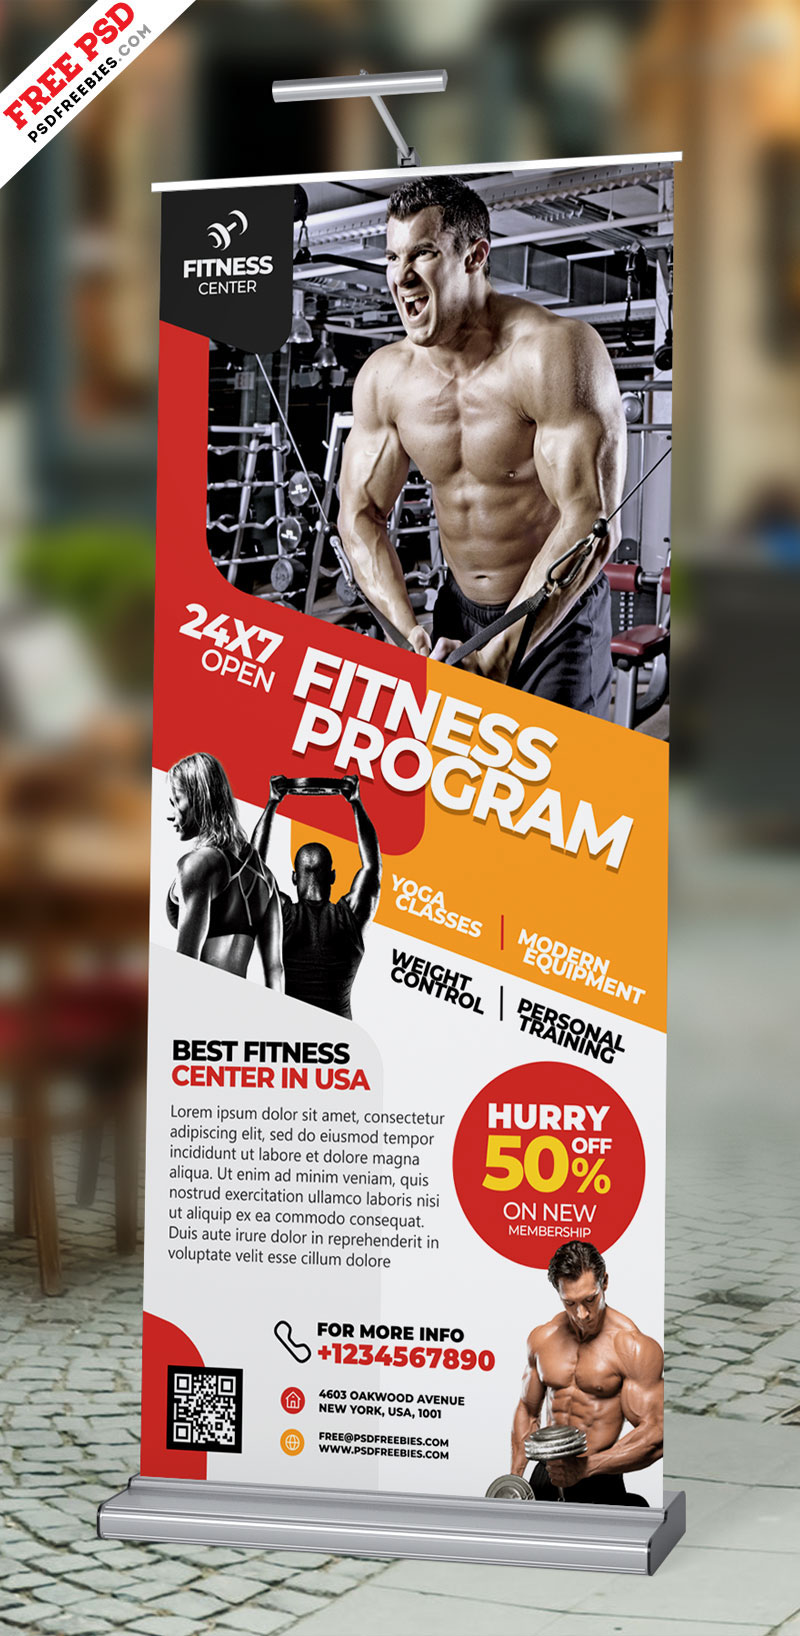 free psd psd freebie gym banner rollup banner free design gym fitness Ad Banner photoshop